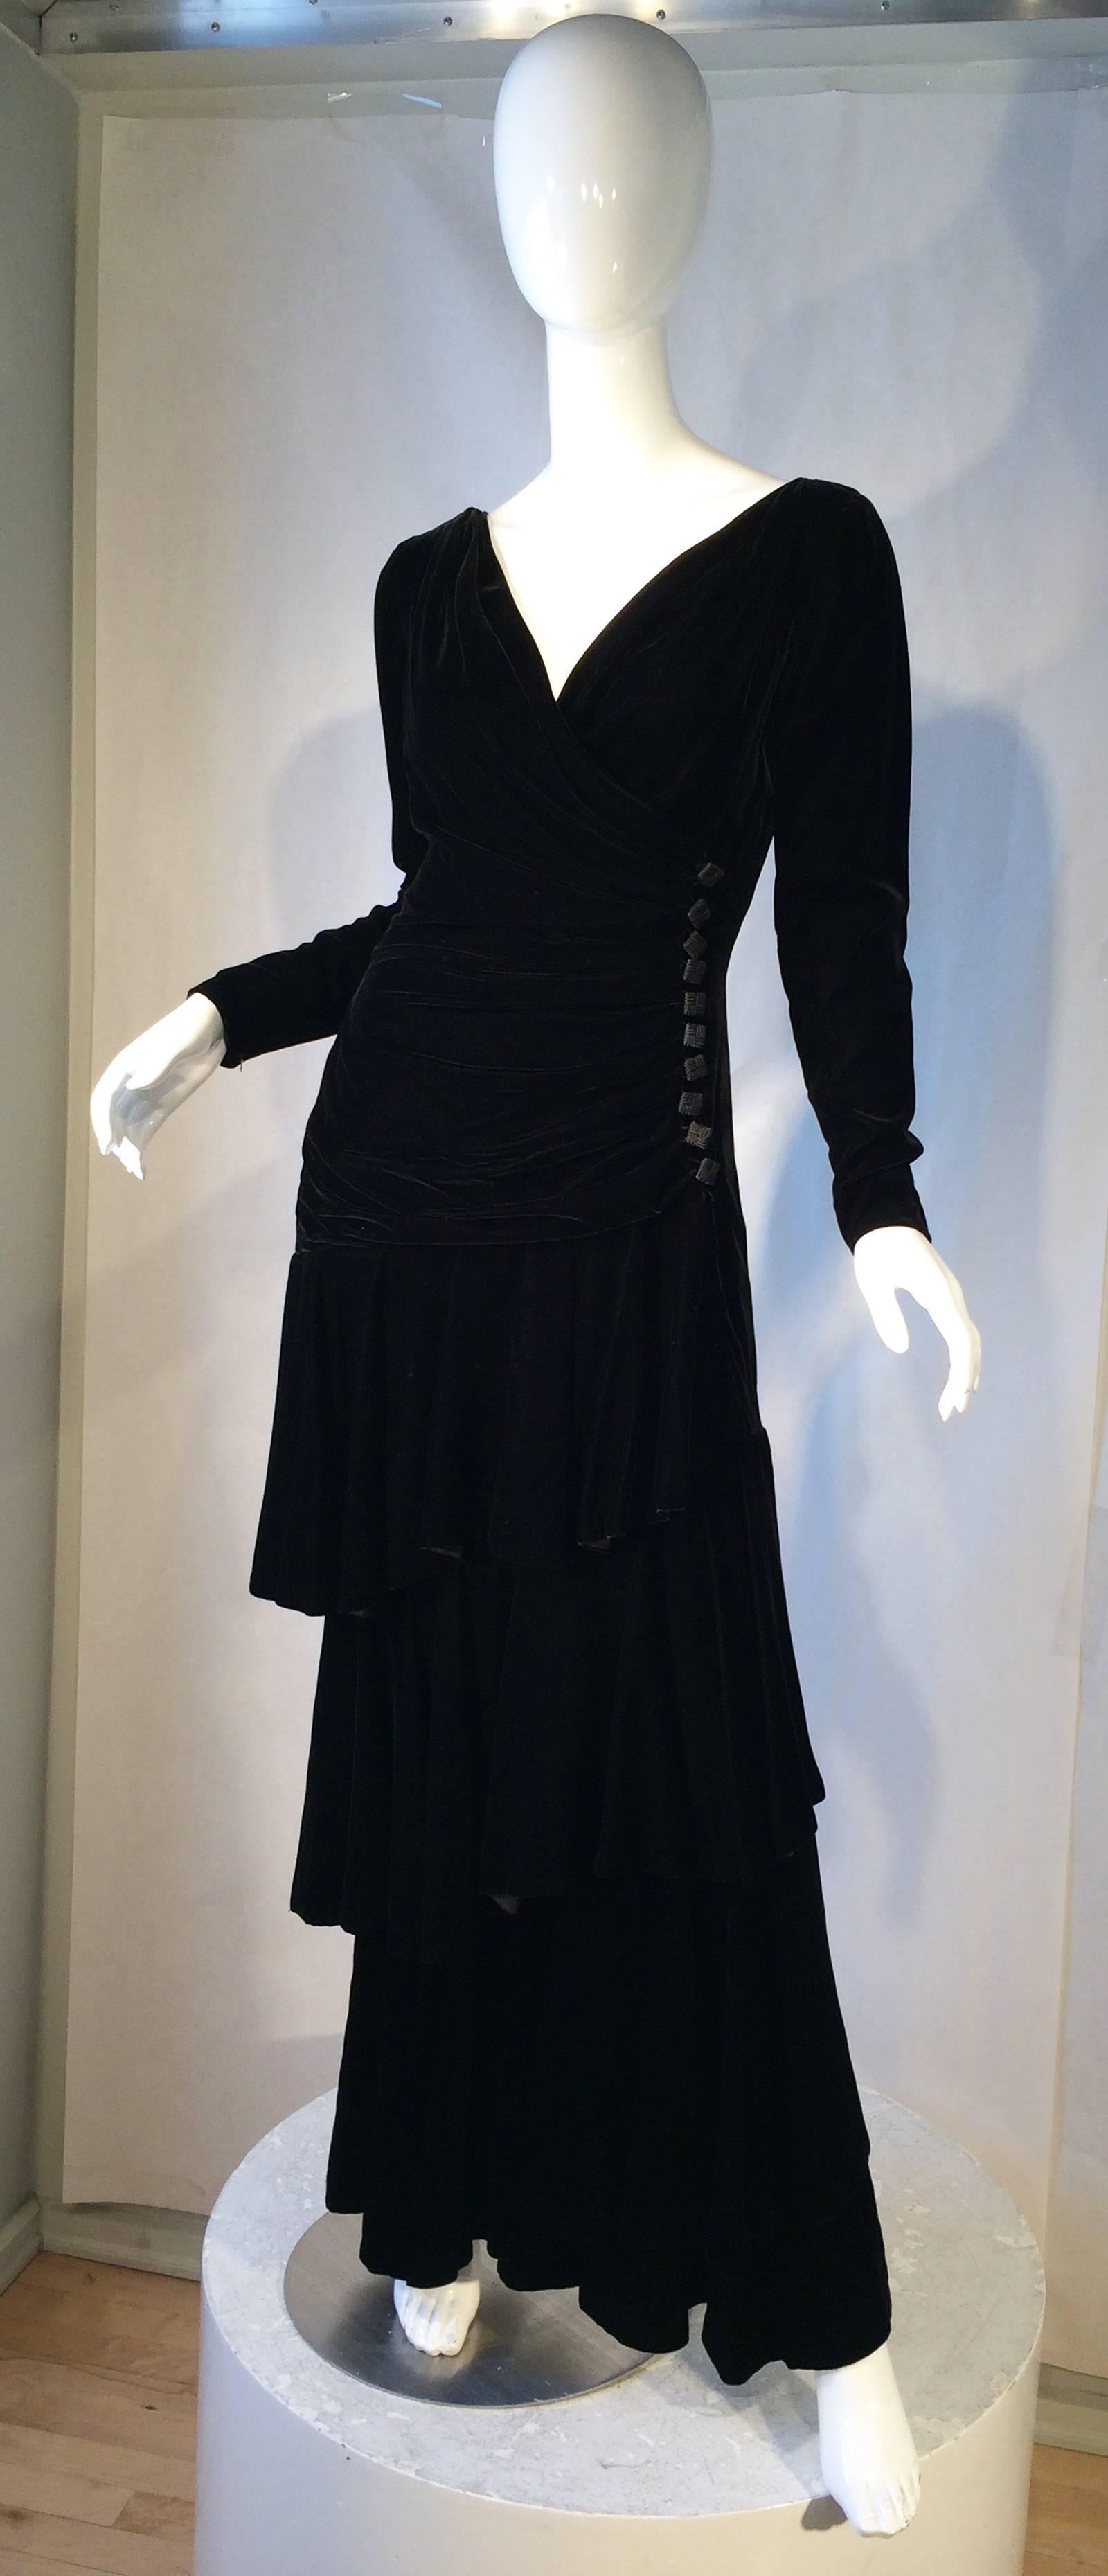 A fine vintage Lanvin evening gown. Exquisite black velvet item features a ruched bodice and spiral tiered floor length skirt. Item fully silk lined with a built in boned bodice. Item interior zips with exterior button closures. Excellent item with